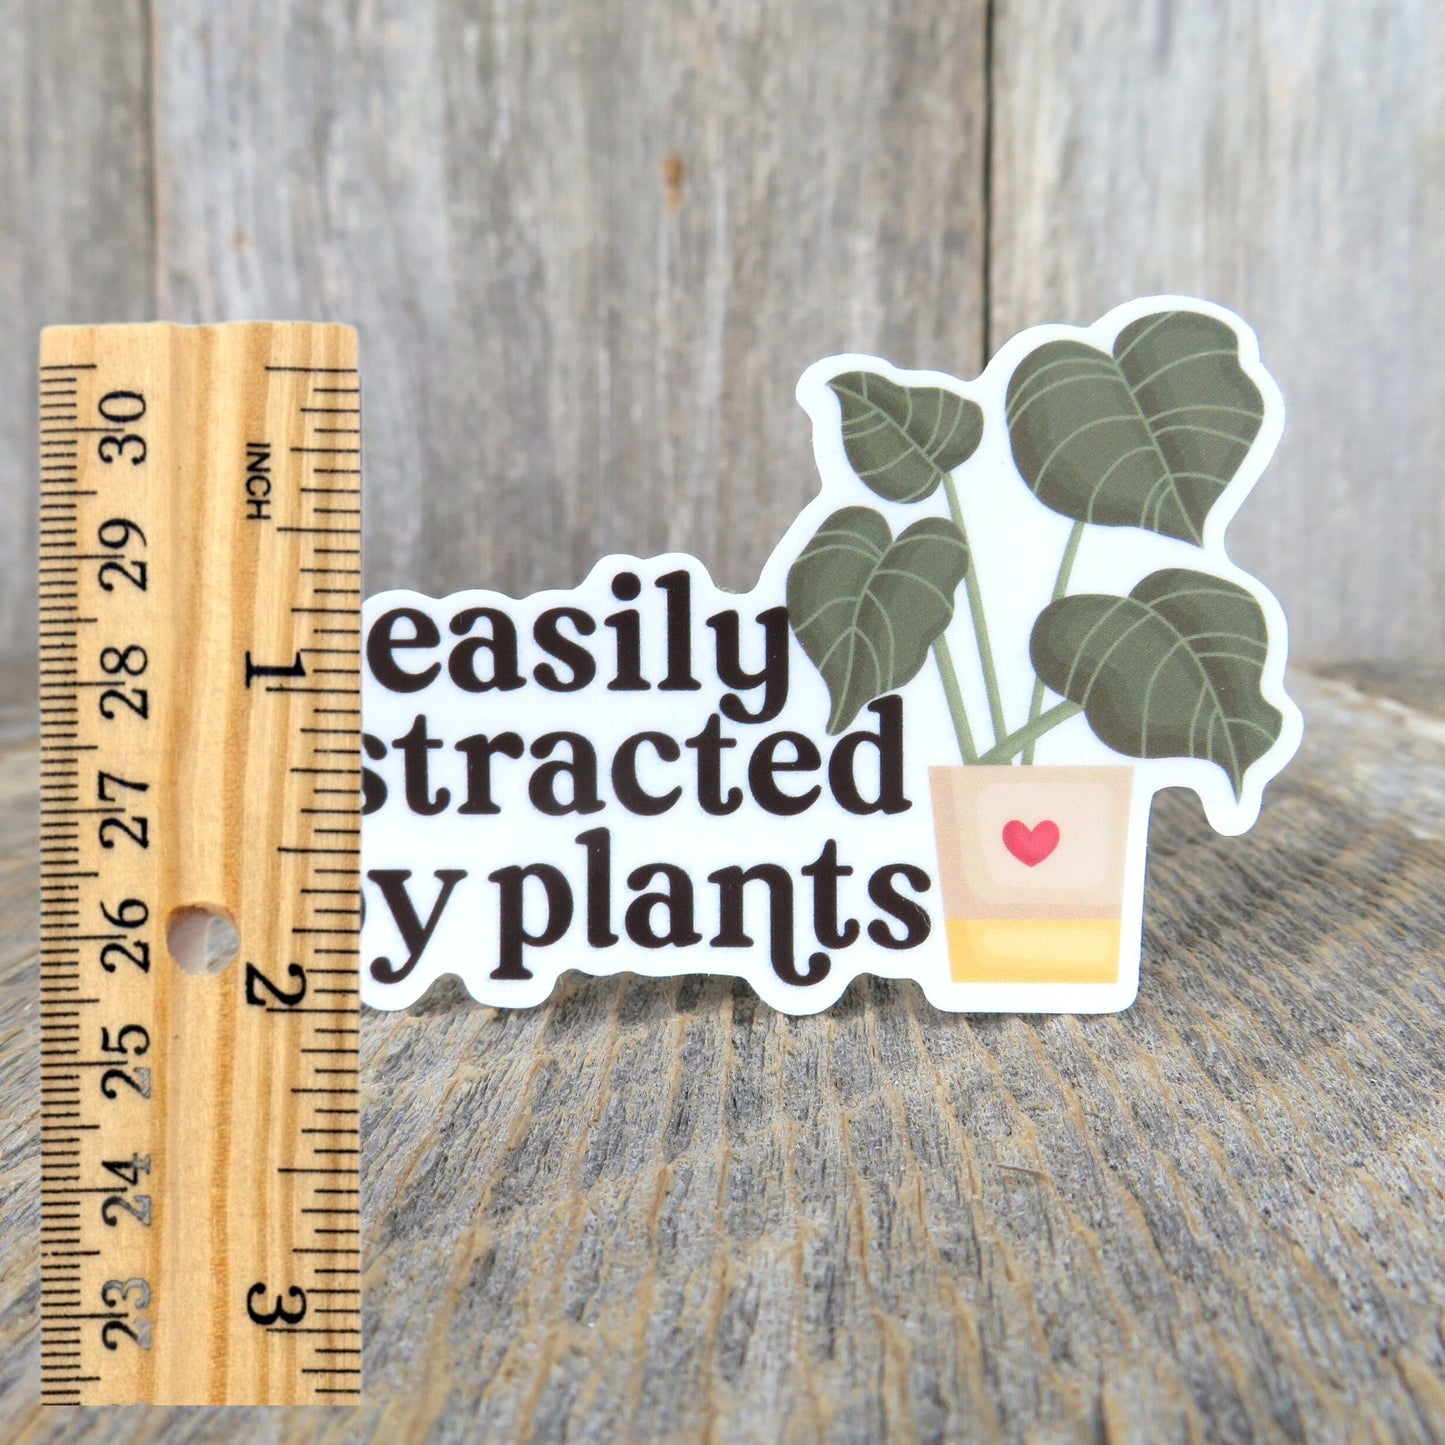 Easily Distracted by Plants Sticker Plant Addict Large Leaf Potted Funny Plant Lover